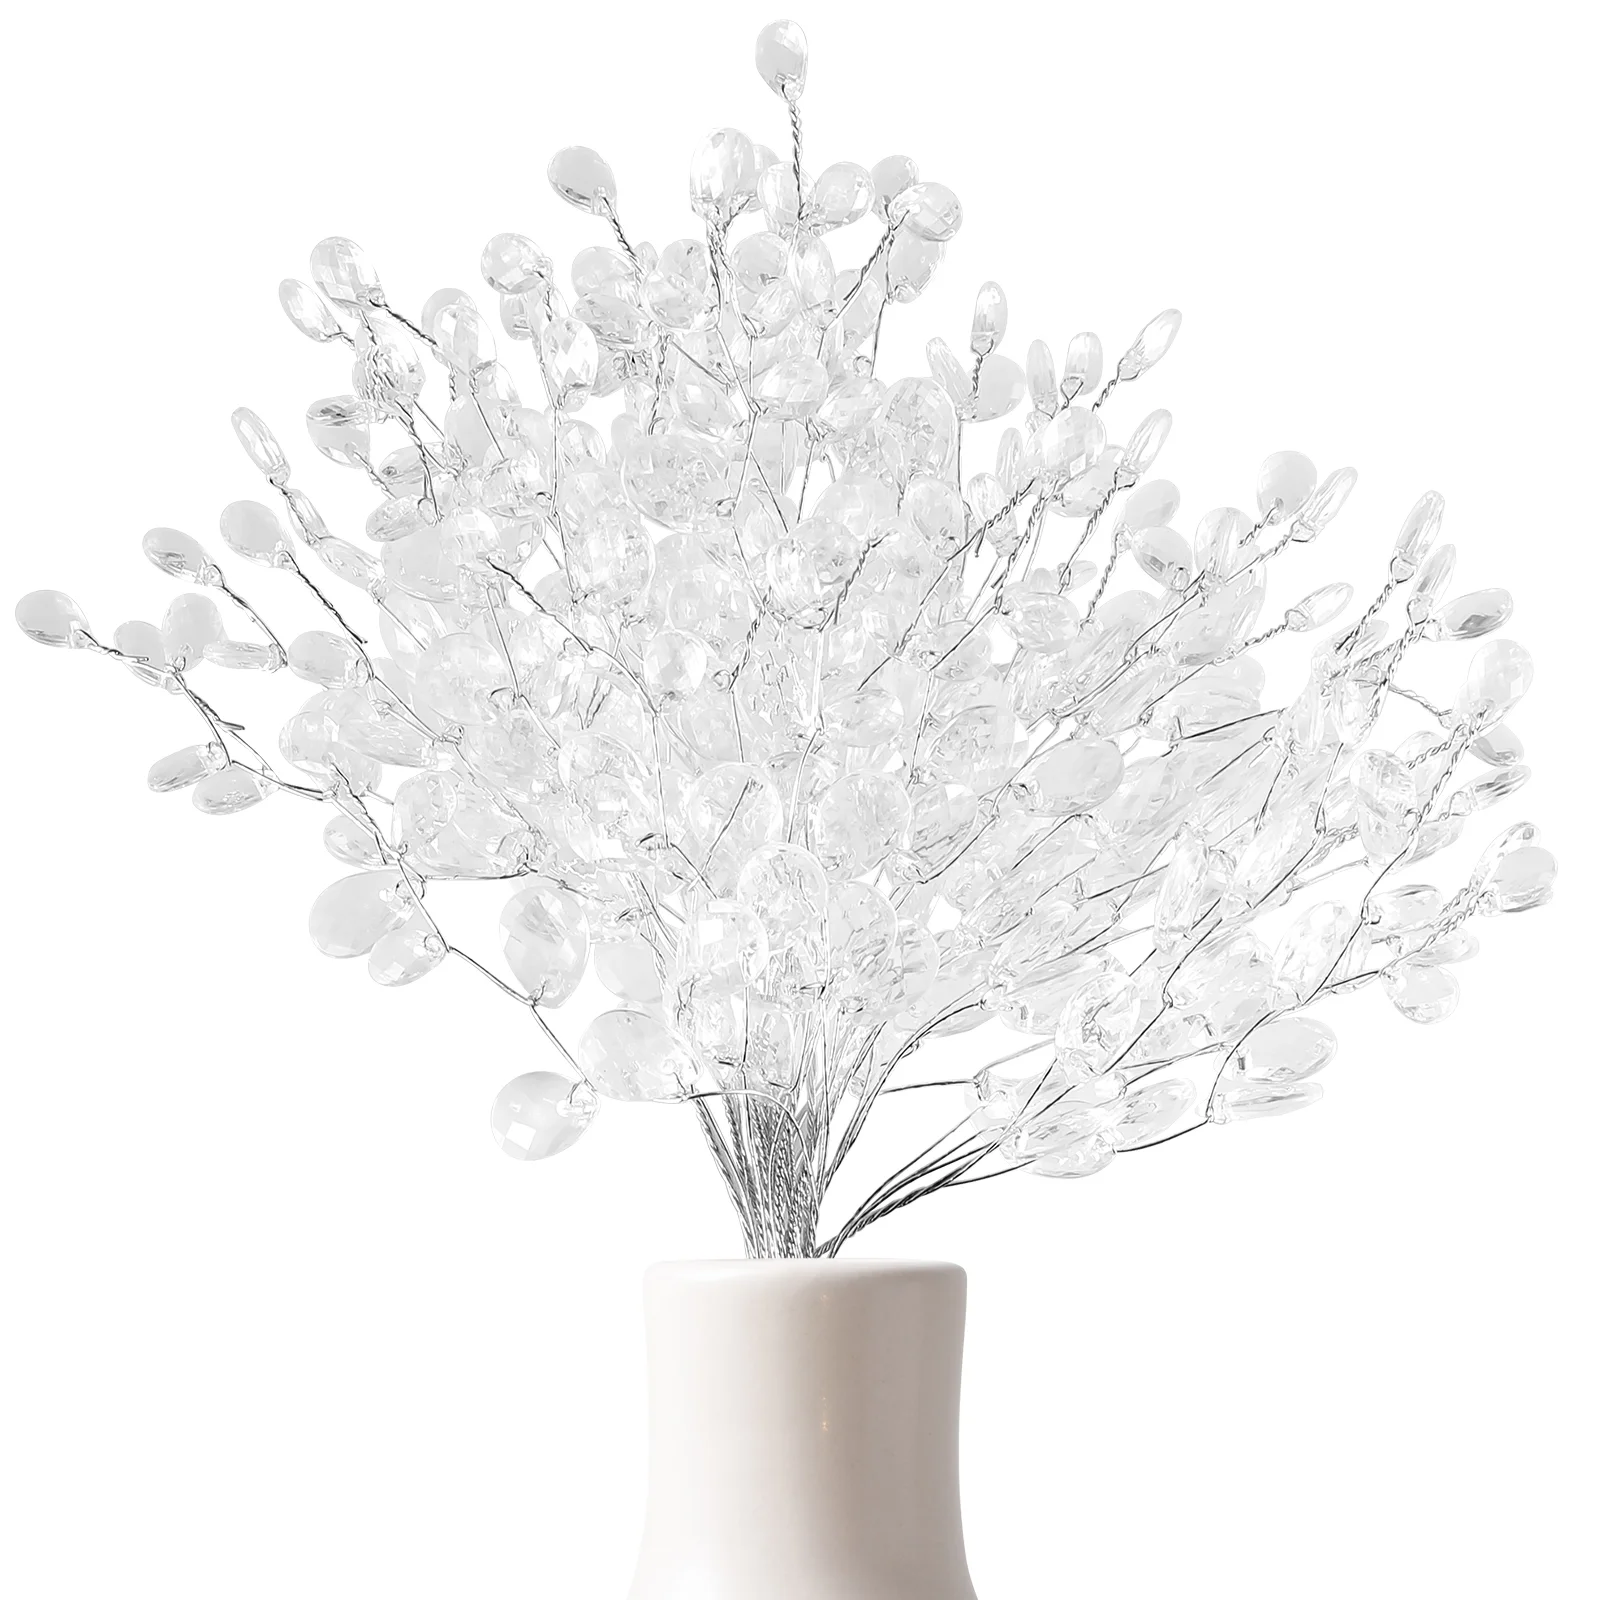 

50 Stems Decorative Twigs Tree Picks White Branches Acrylic Bead Drops Flower Flowers Artificial Bouquets Bride Christmas